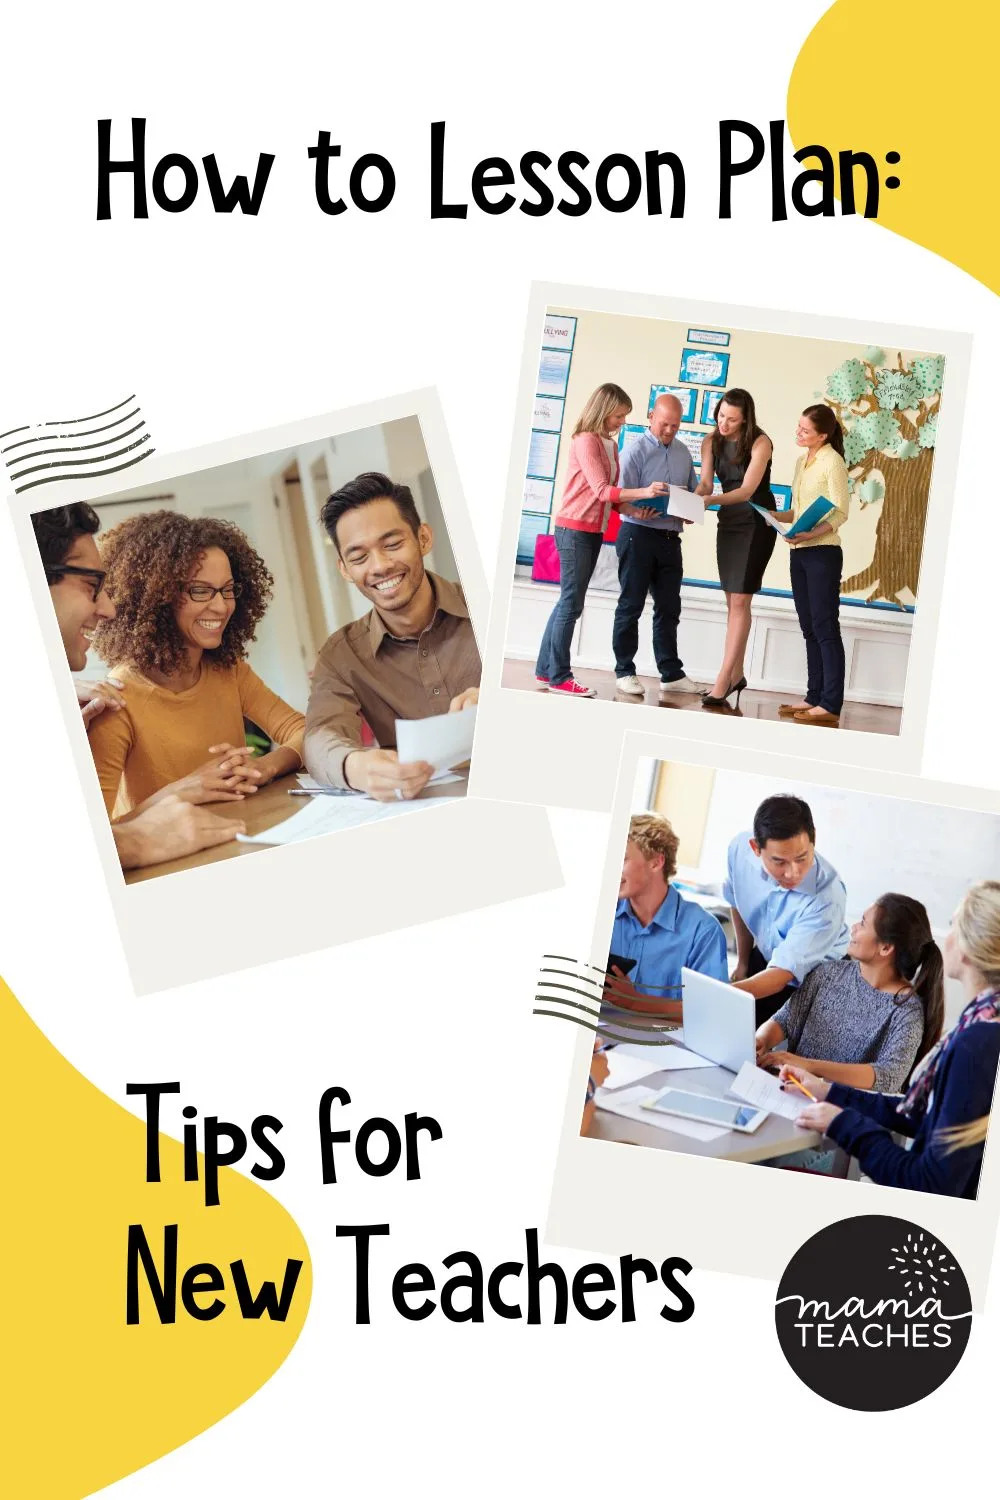 How to Lesson Plan Tips for New Teachers